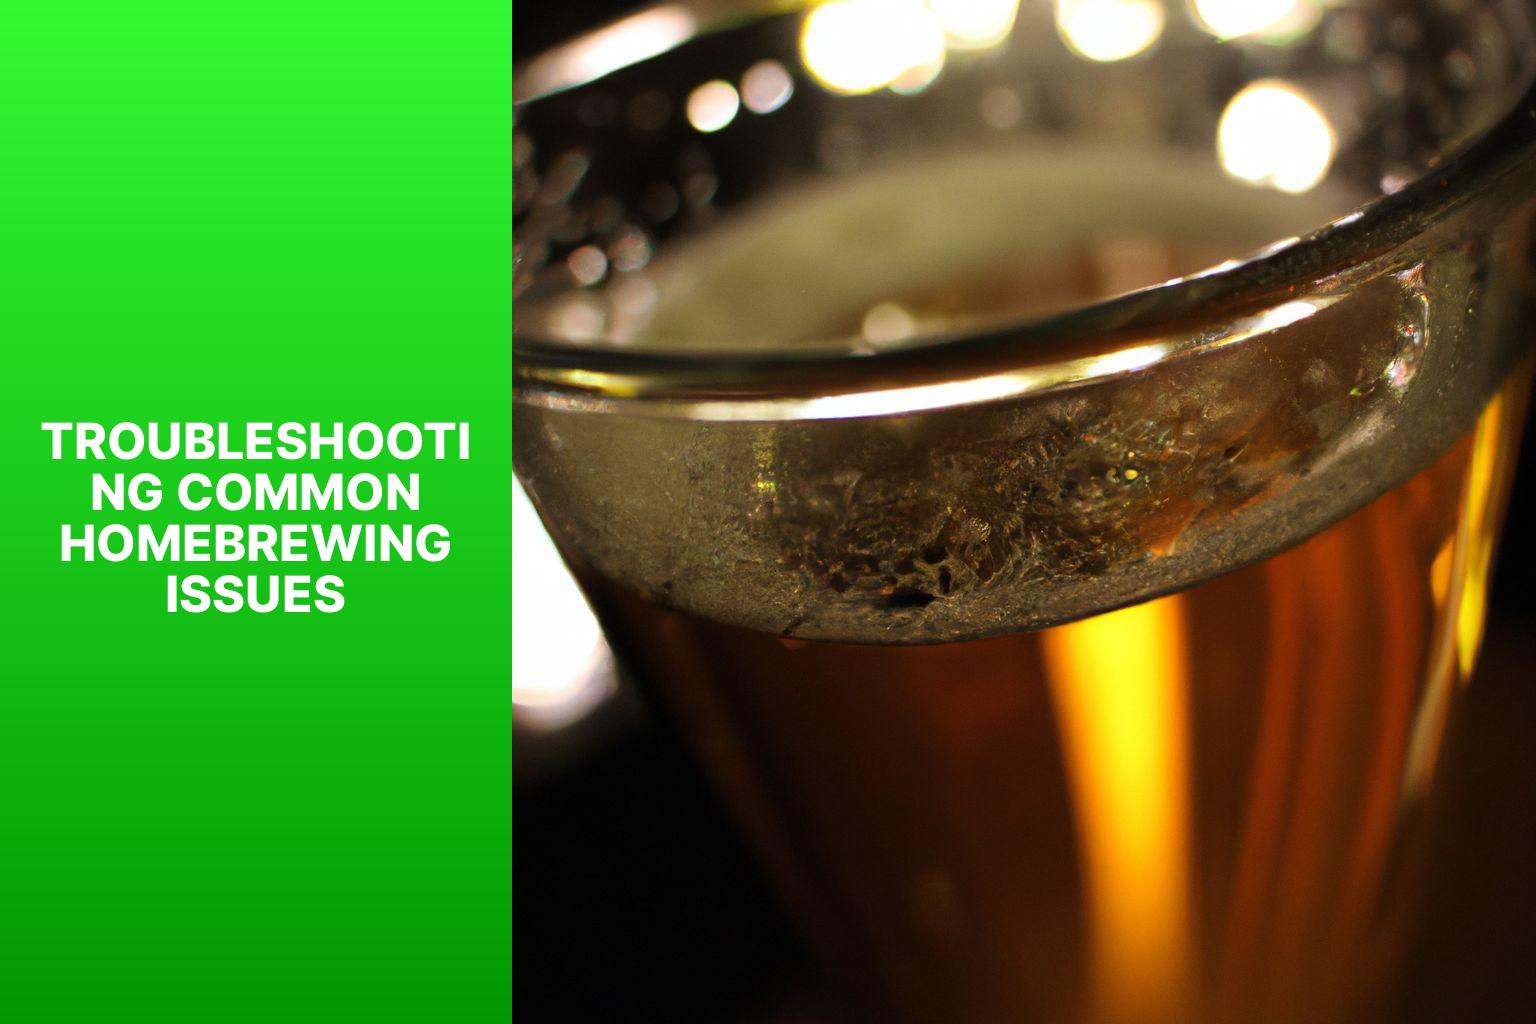 Troubleshooting Common Homebrewing Issues - Homebrewing Basics for Beginners 